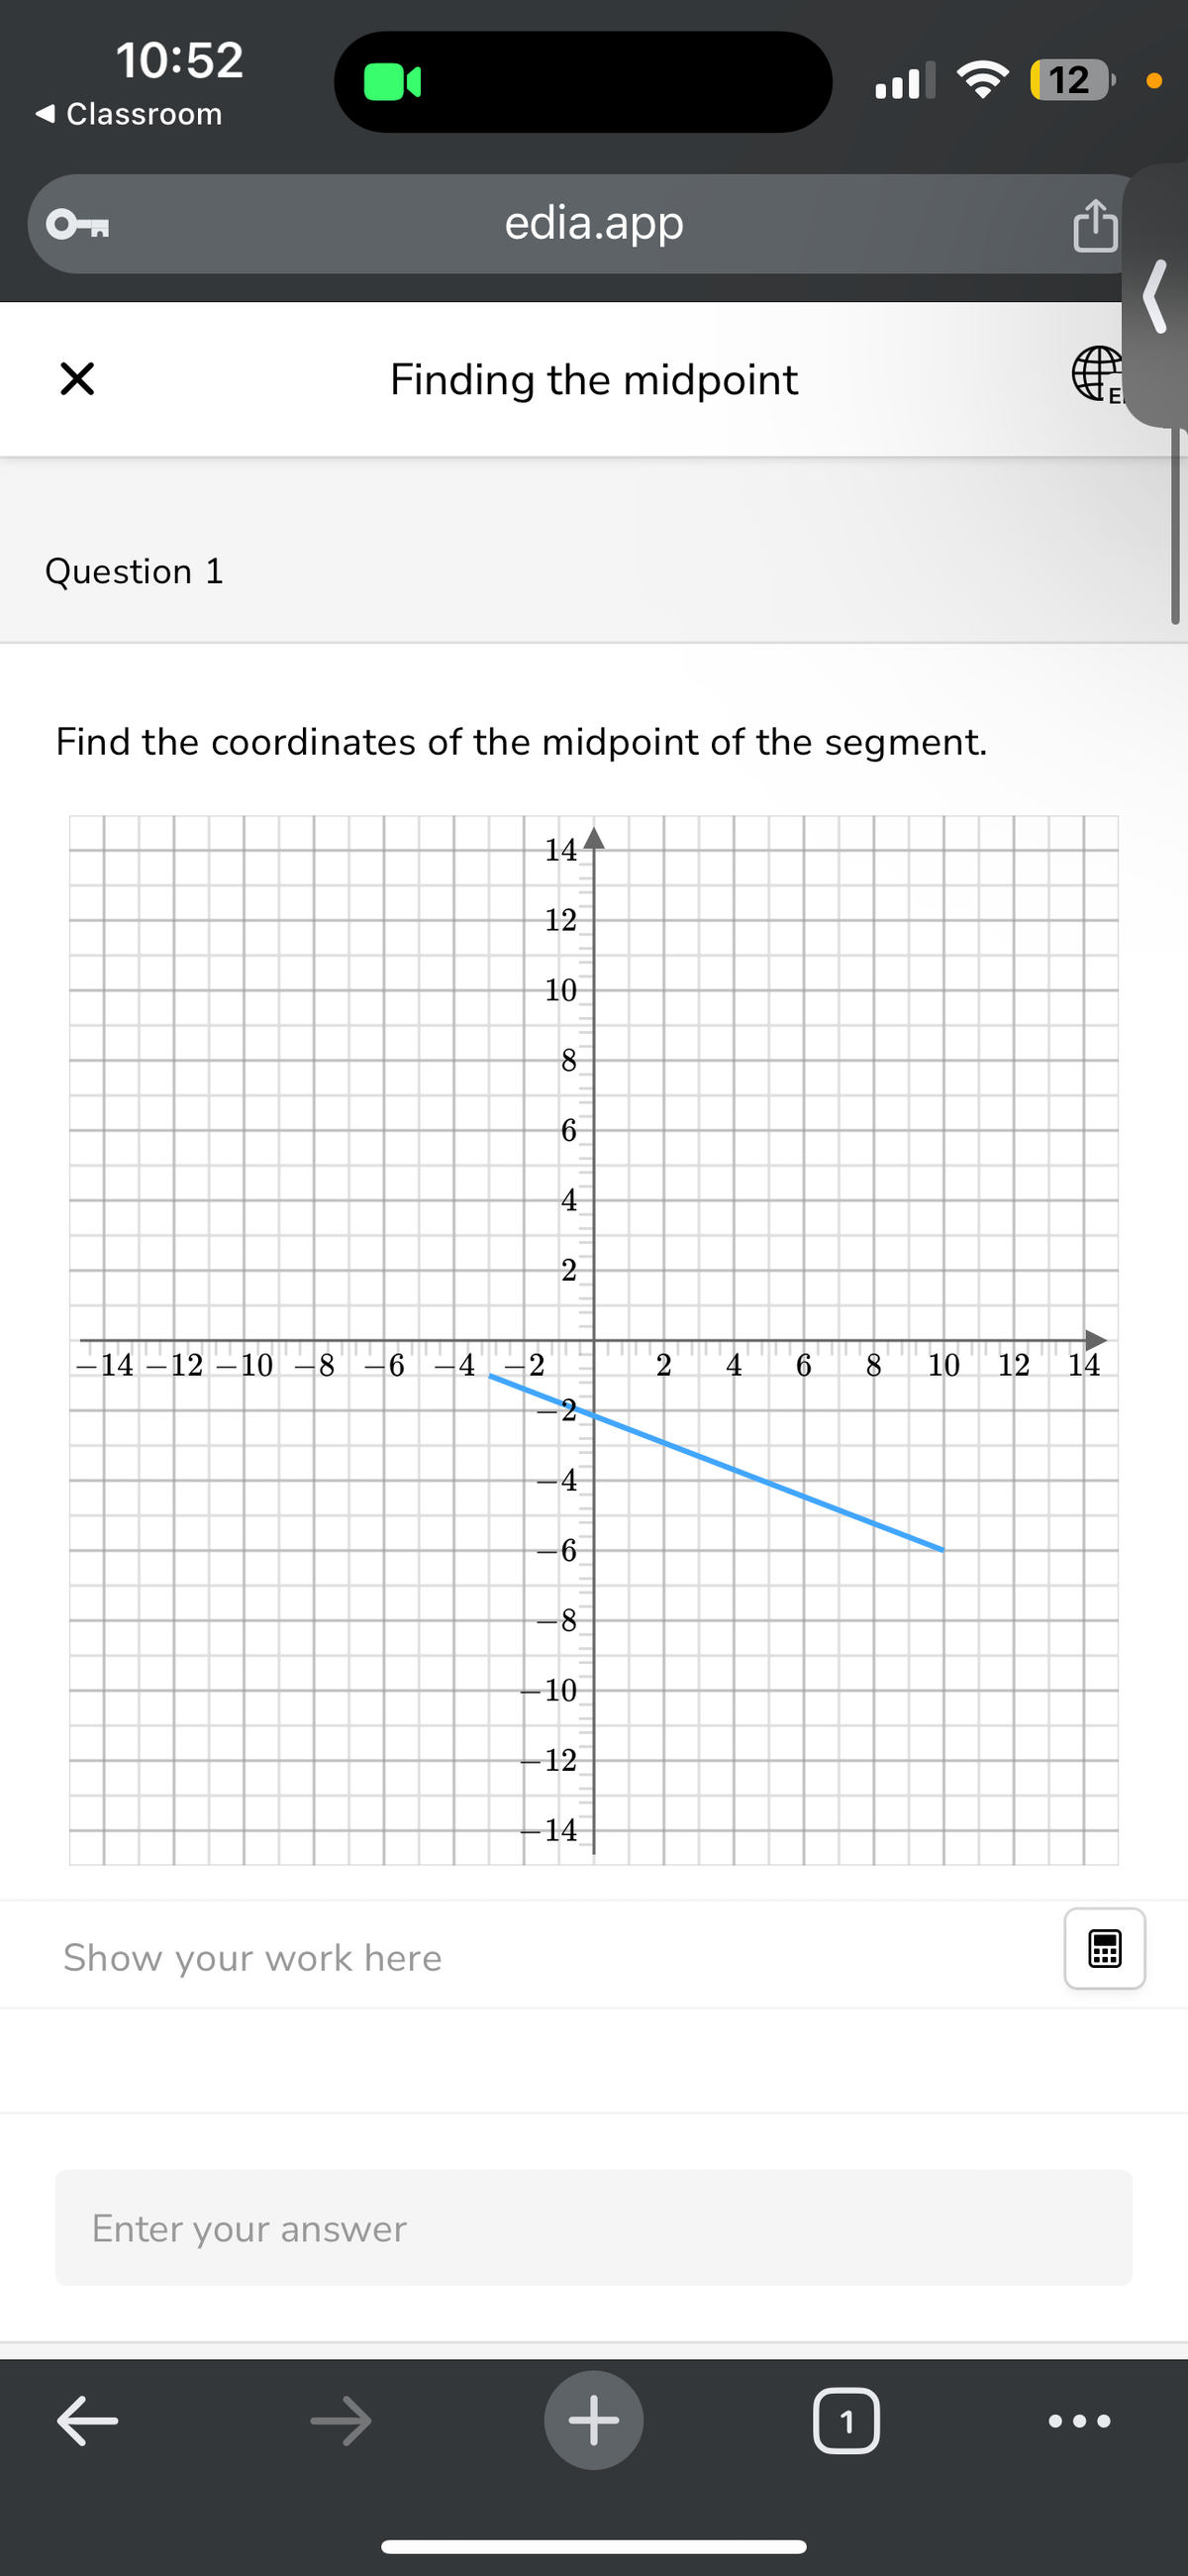 10:52
Classroom
☑
Question 1
edia.app
Finding the midpoint
12
Find the coordinates of the midpoint of the segment.
14
12
10
8
00
6
4
2
−14 −12 −10 −8 −6 −4 −2
Show your work here
Enter your answer
E
123
12
14
2
4
6 8 10
2
4
-6
-8
-10
-12
14
+
1